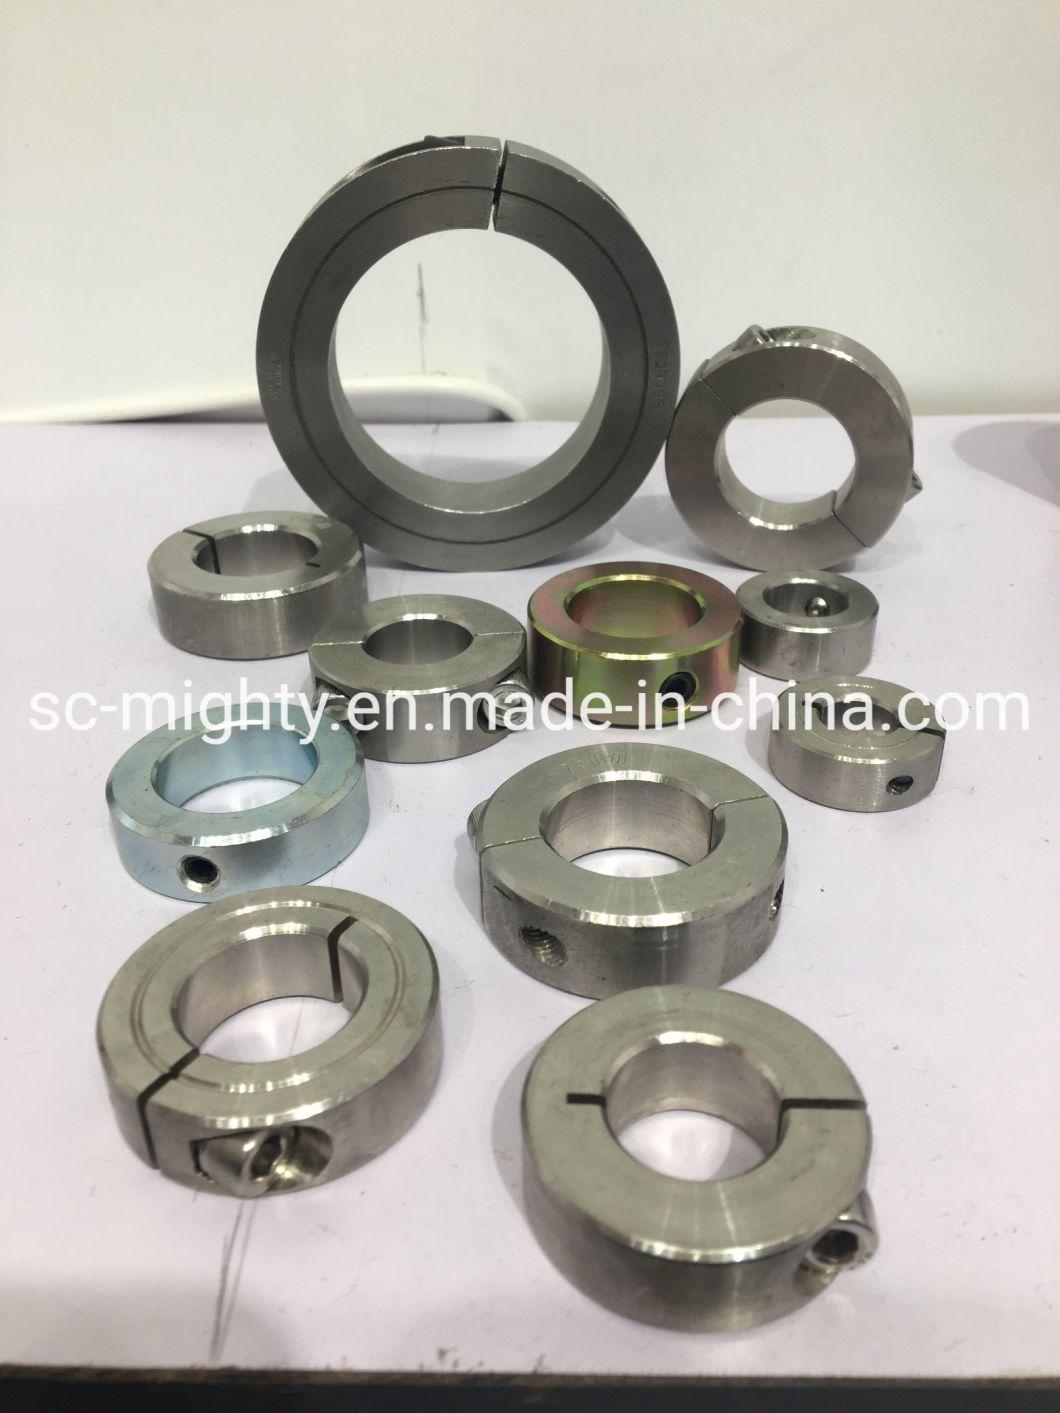 Mighty High Quality Single Split Shaft Collar for Transmission Industry with Reasonable Price